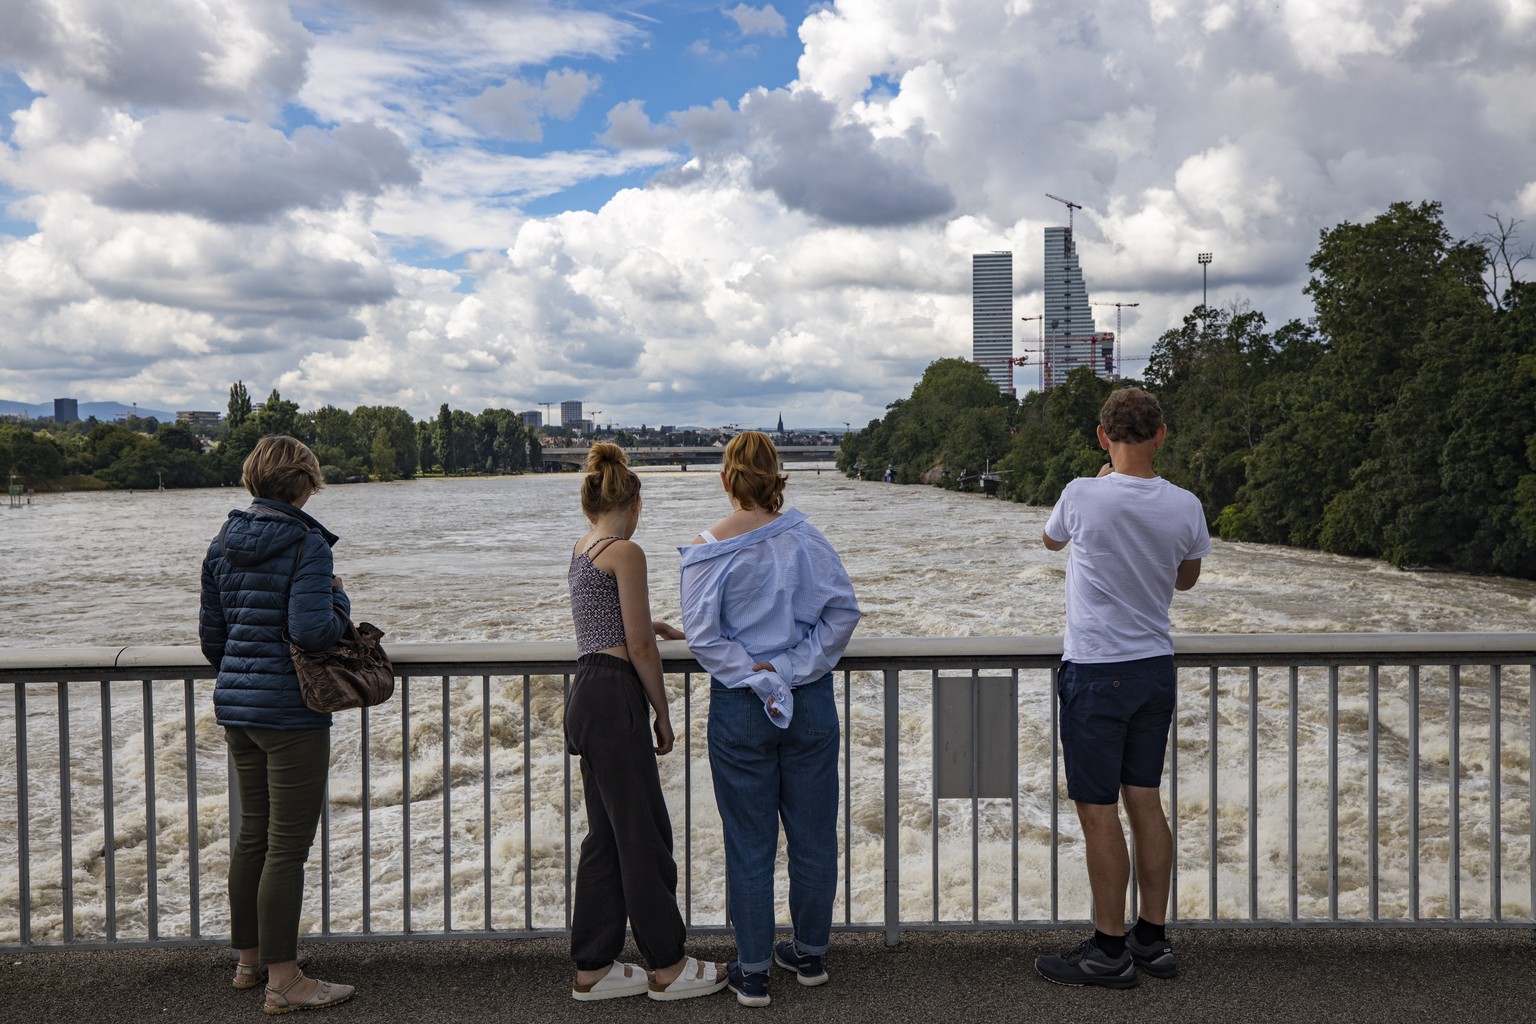 epa09348555 People look on from a bridge amid high water levels on the Rhein (Rhine River), as the Roche Towers stand in the background, in Basel, Switzerland, 16 July 2021. The high water mark was ex ...